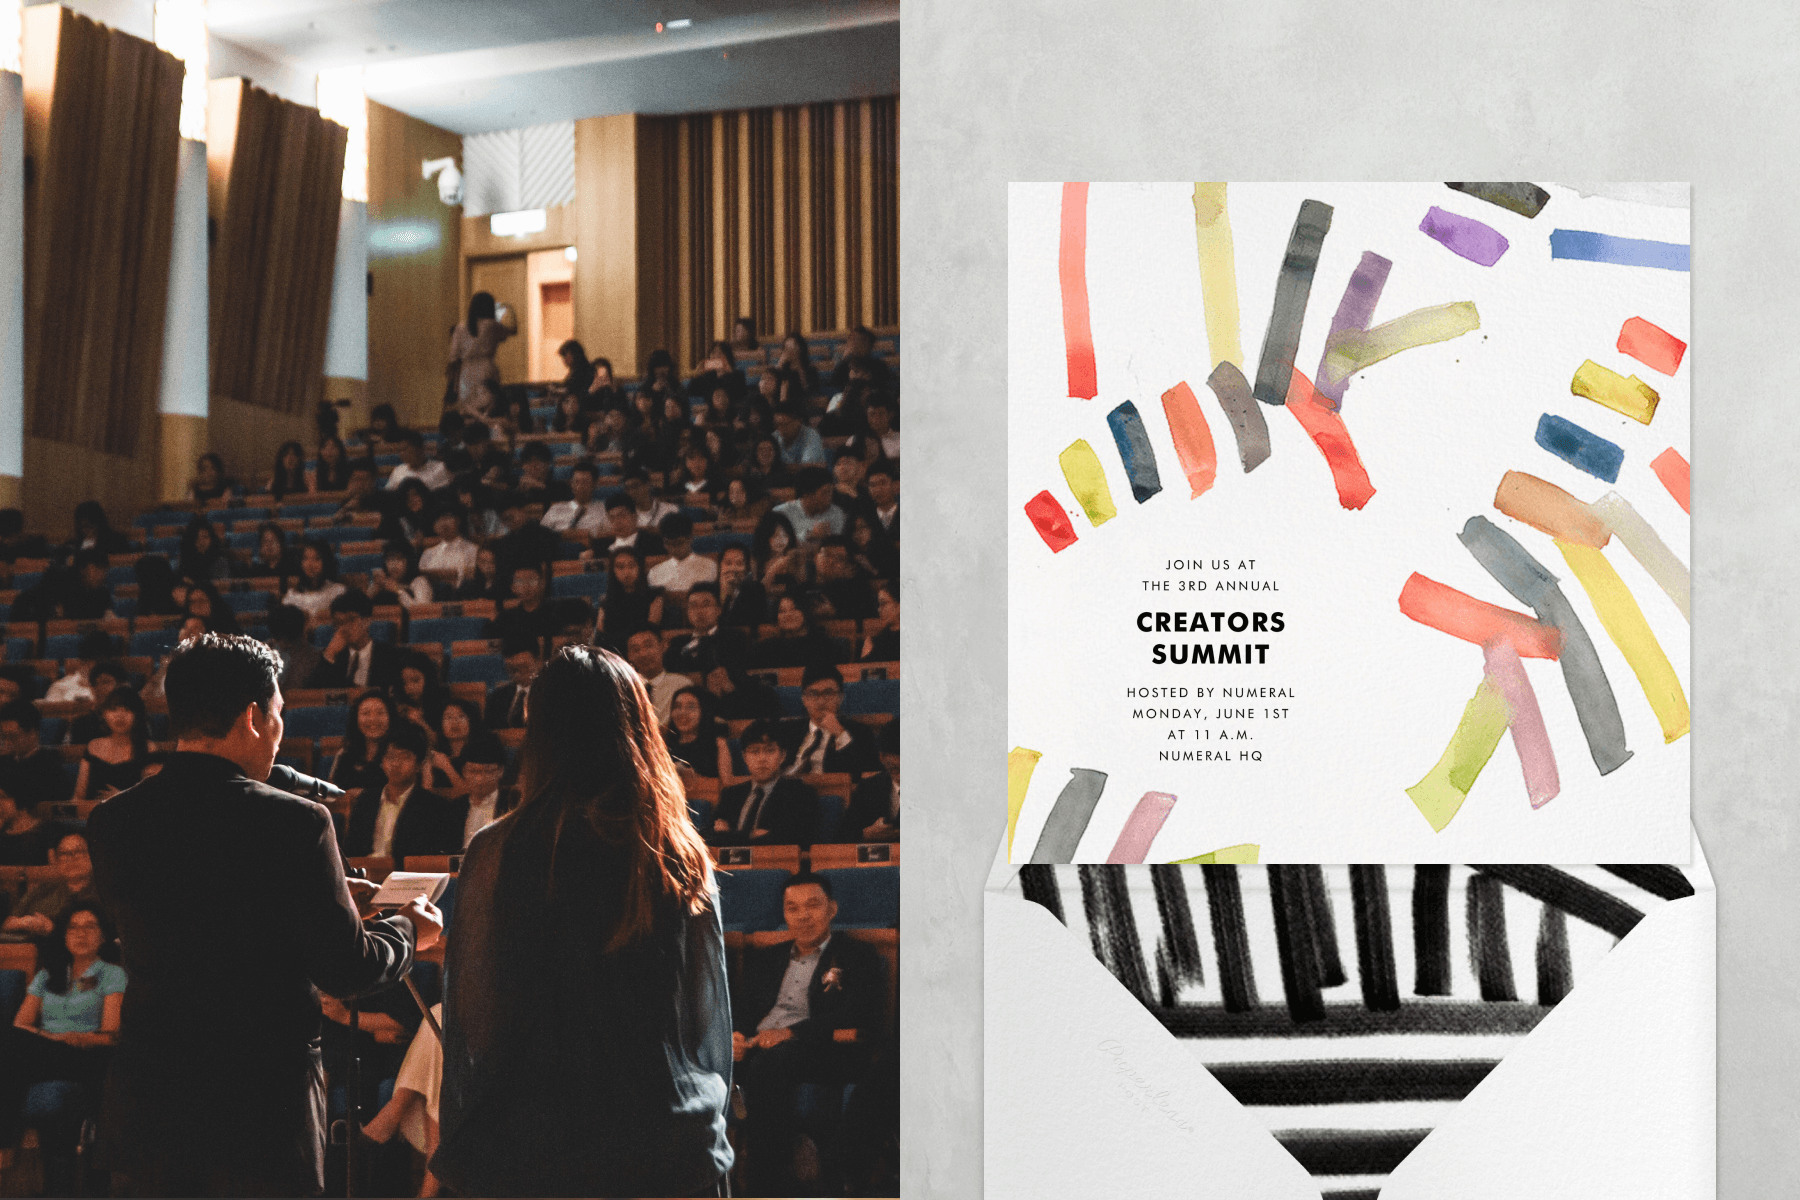 Left: Two people speak to a crowd in an auditorium. Right: A creators summit invitation with colorful watercolor brush strokes placed randomly.